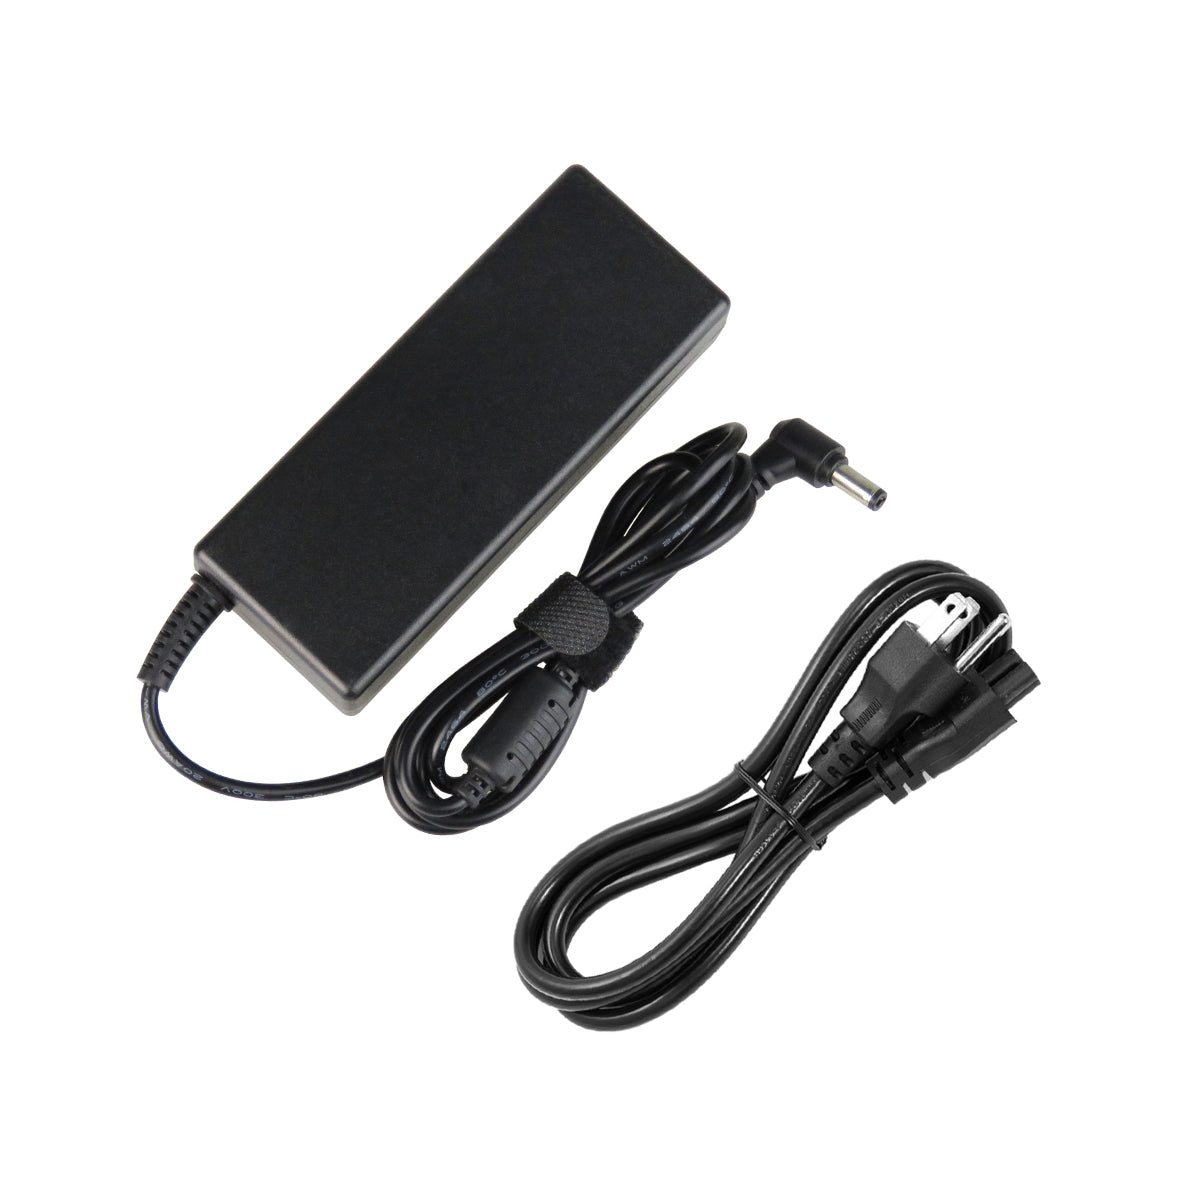 AC Adapter Charger for ASUS U57A Notebook.